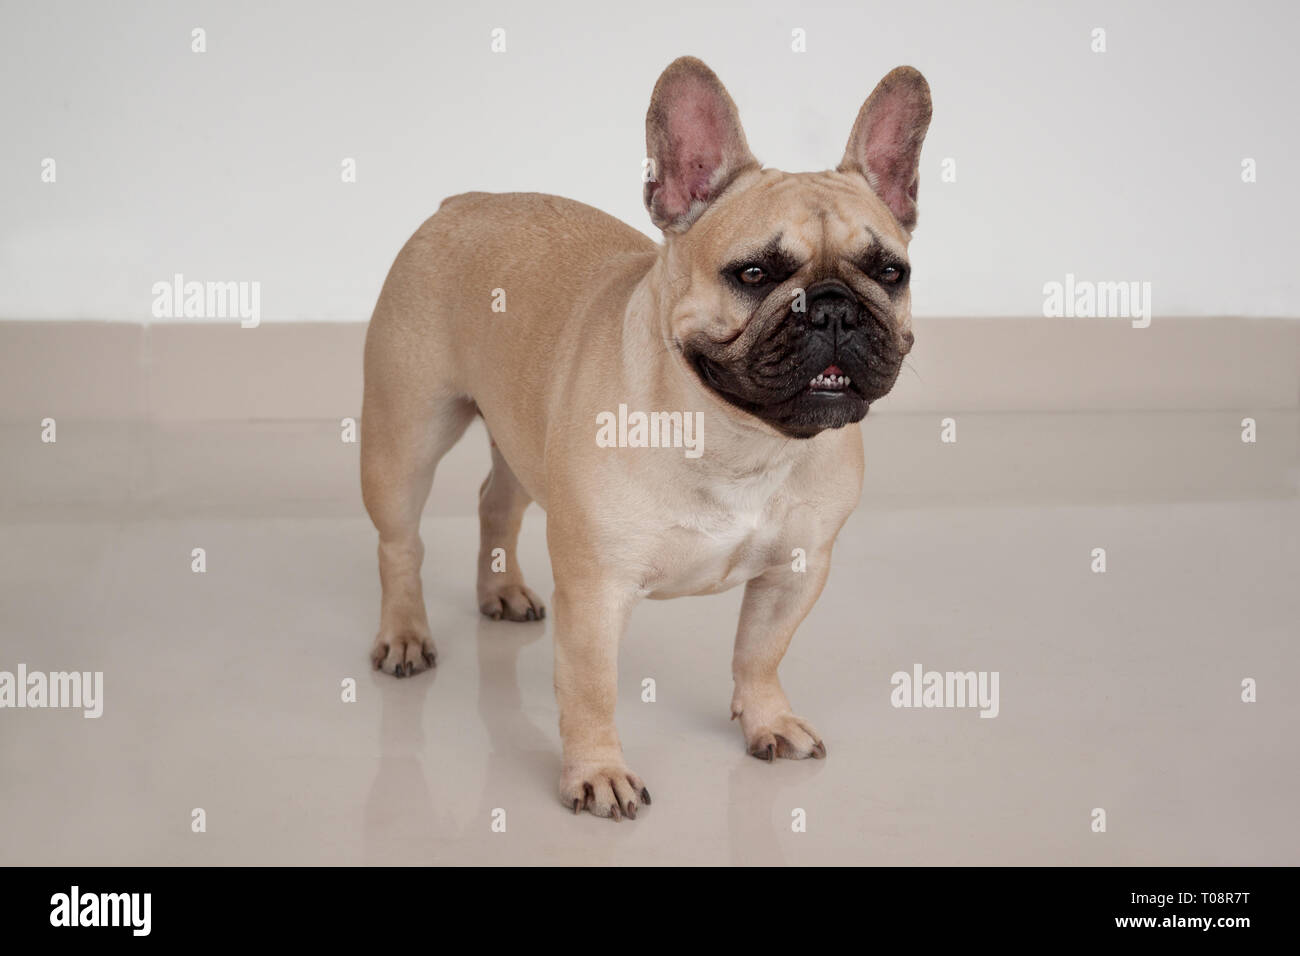 Cream-colored french bulldog puppy is standing on tiled floor. Pet ...